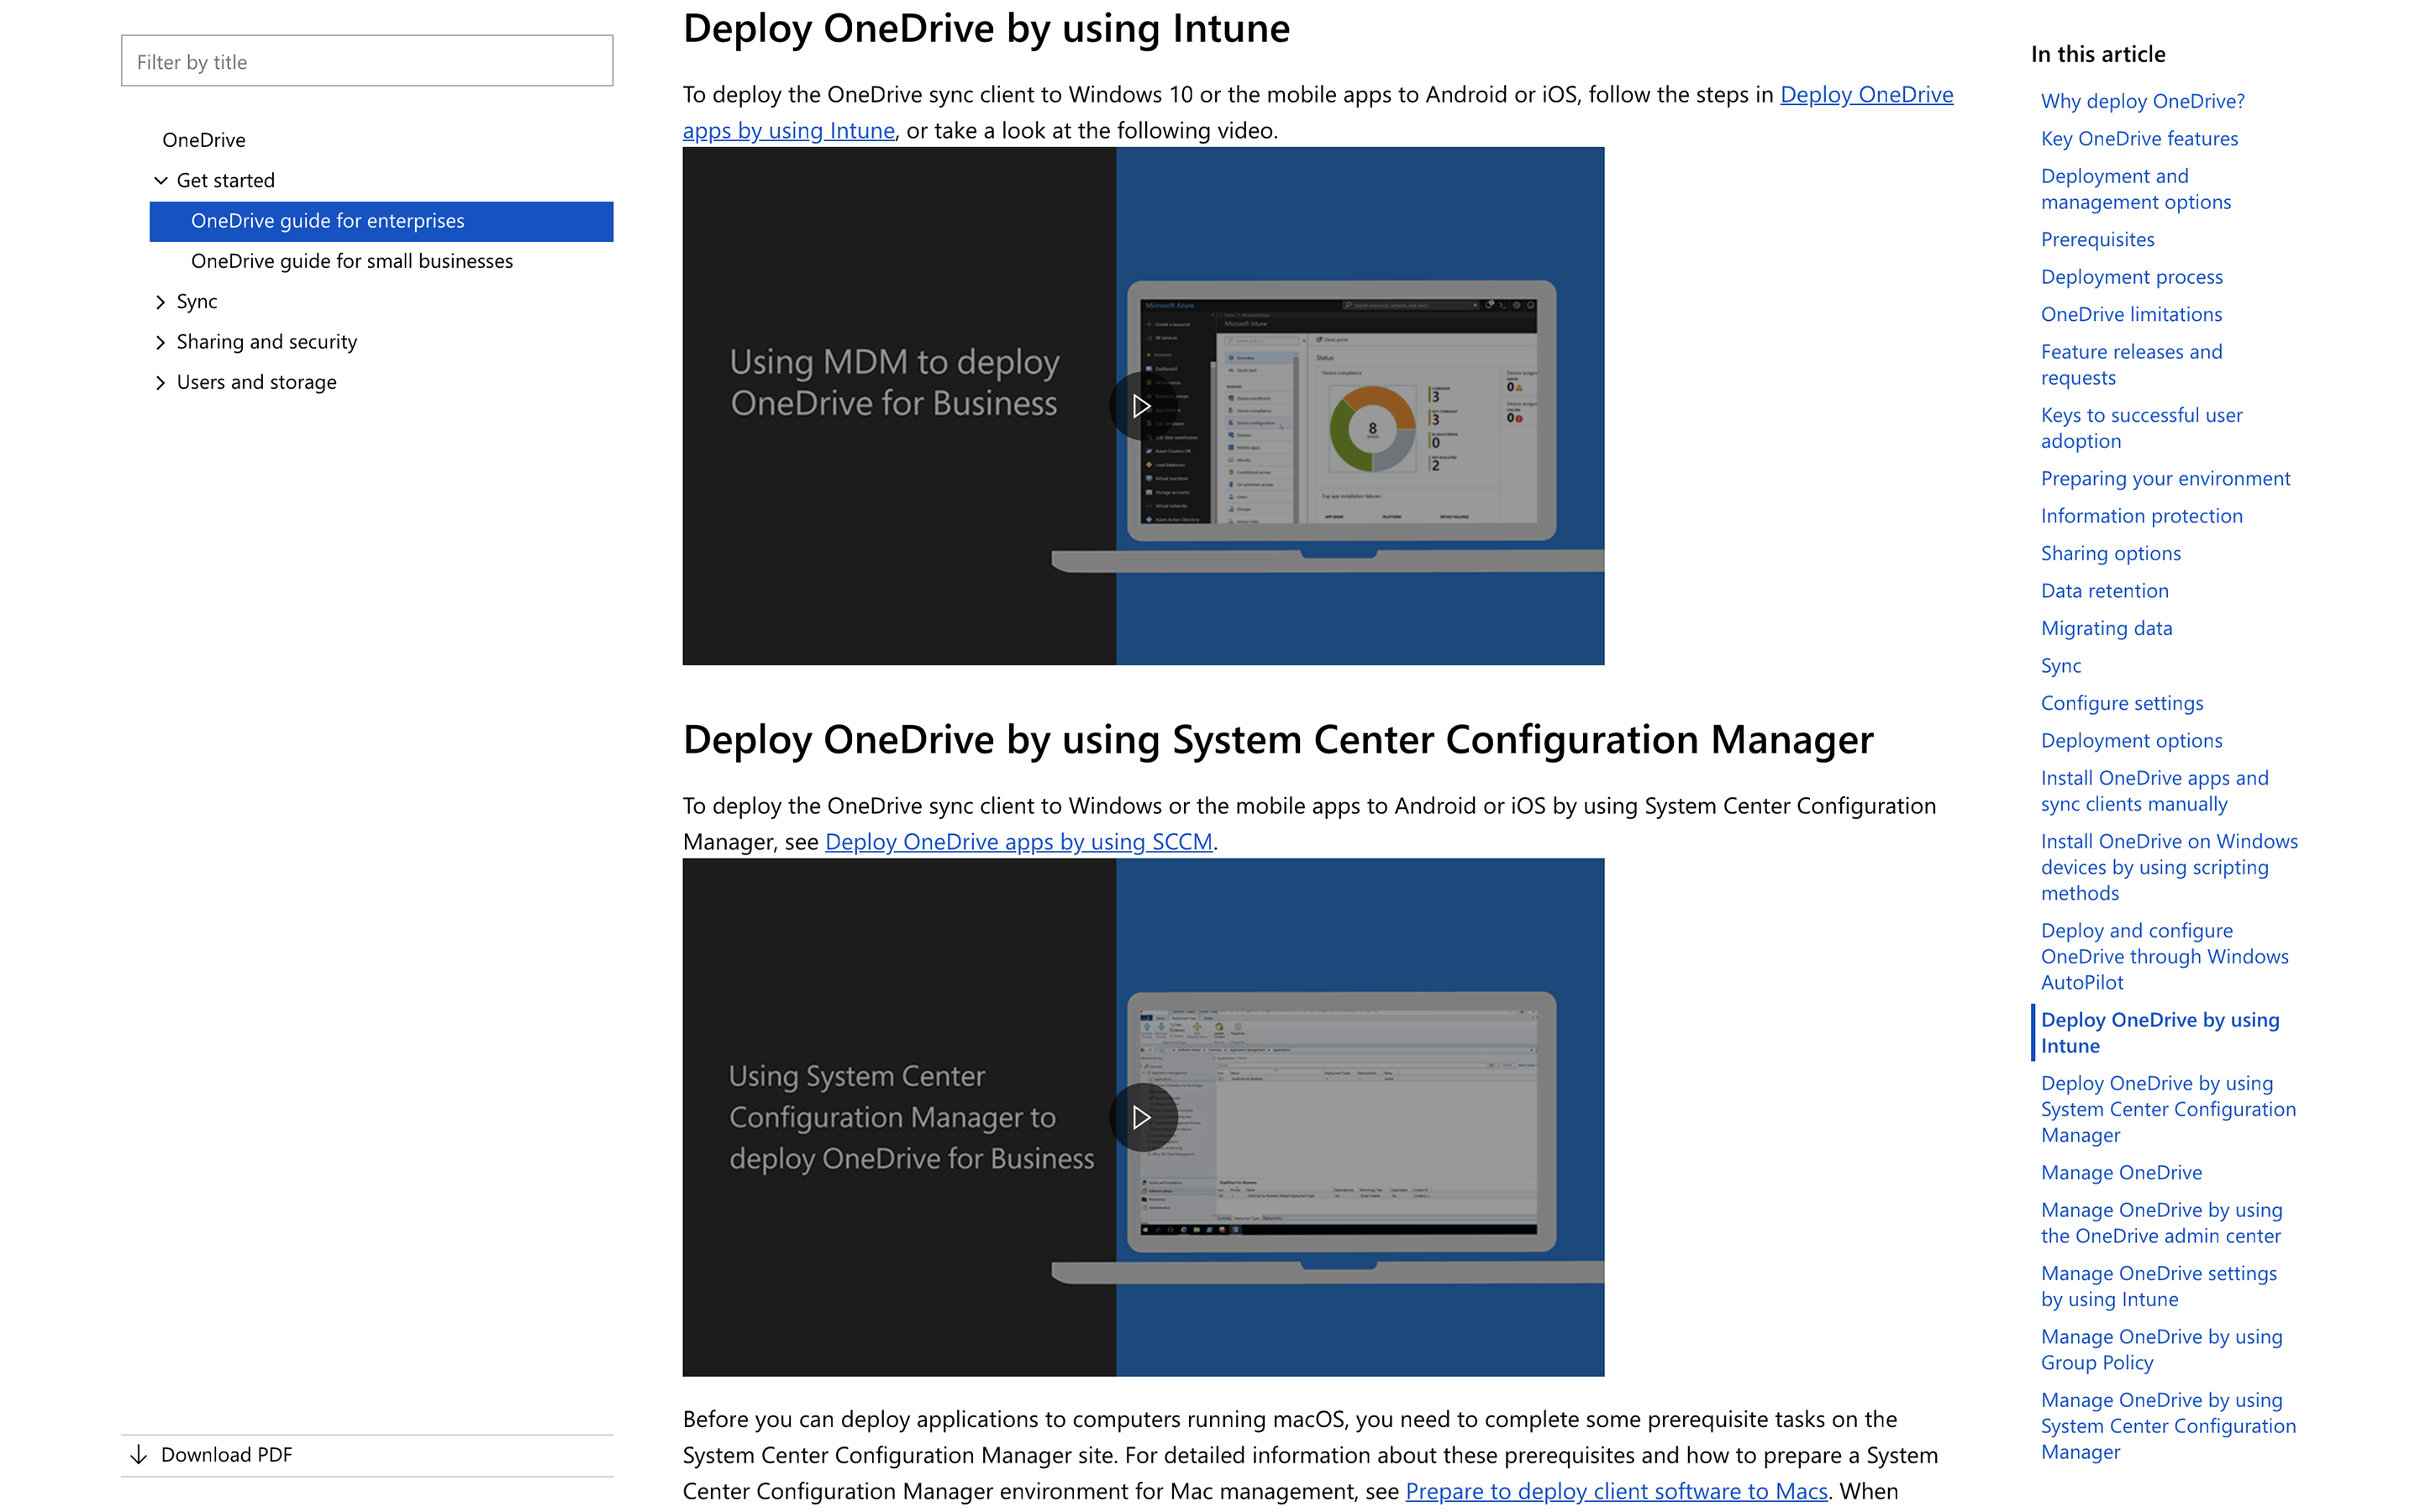 Screenshot of the “Deploy OneDrive by using Intune” section